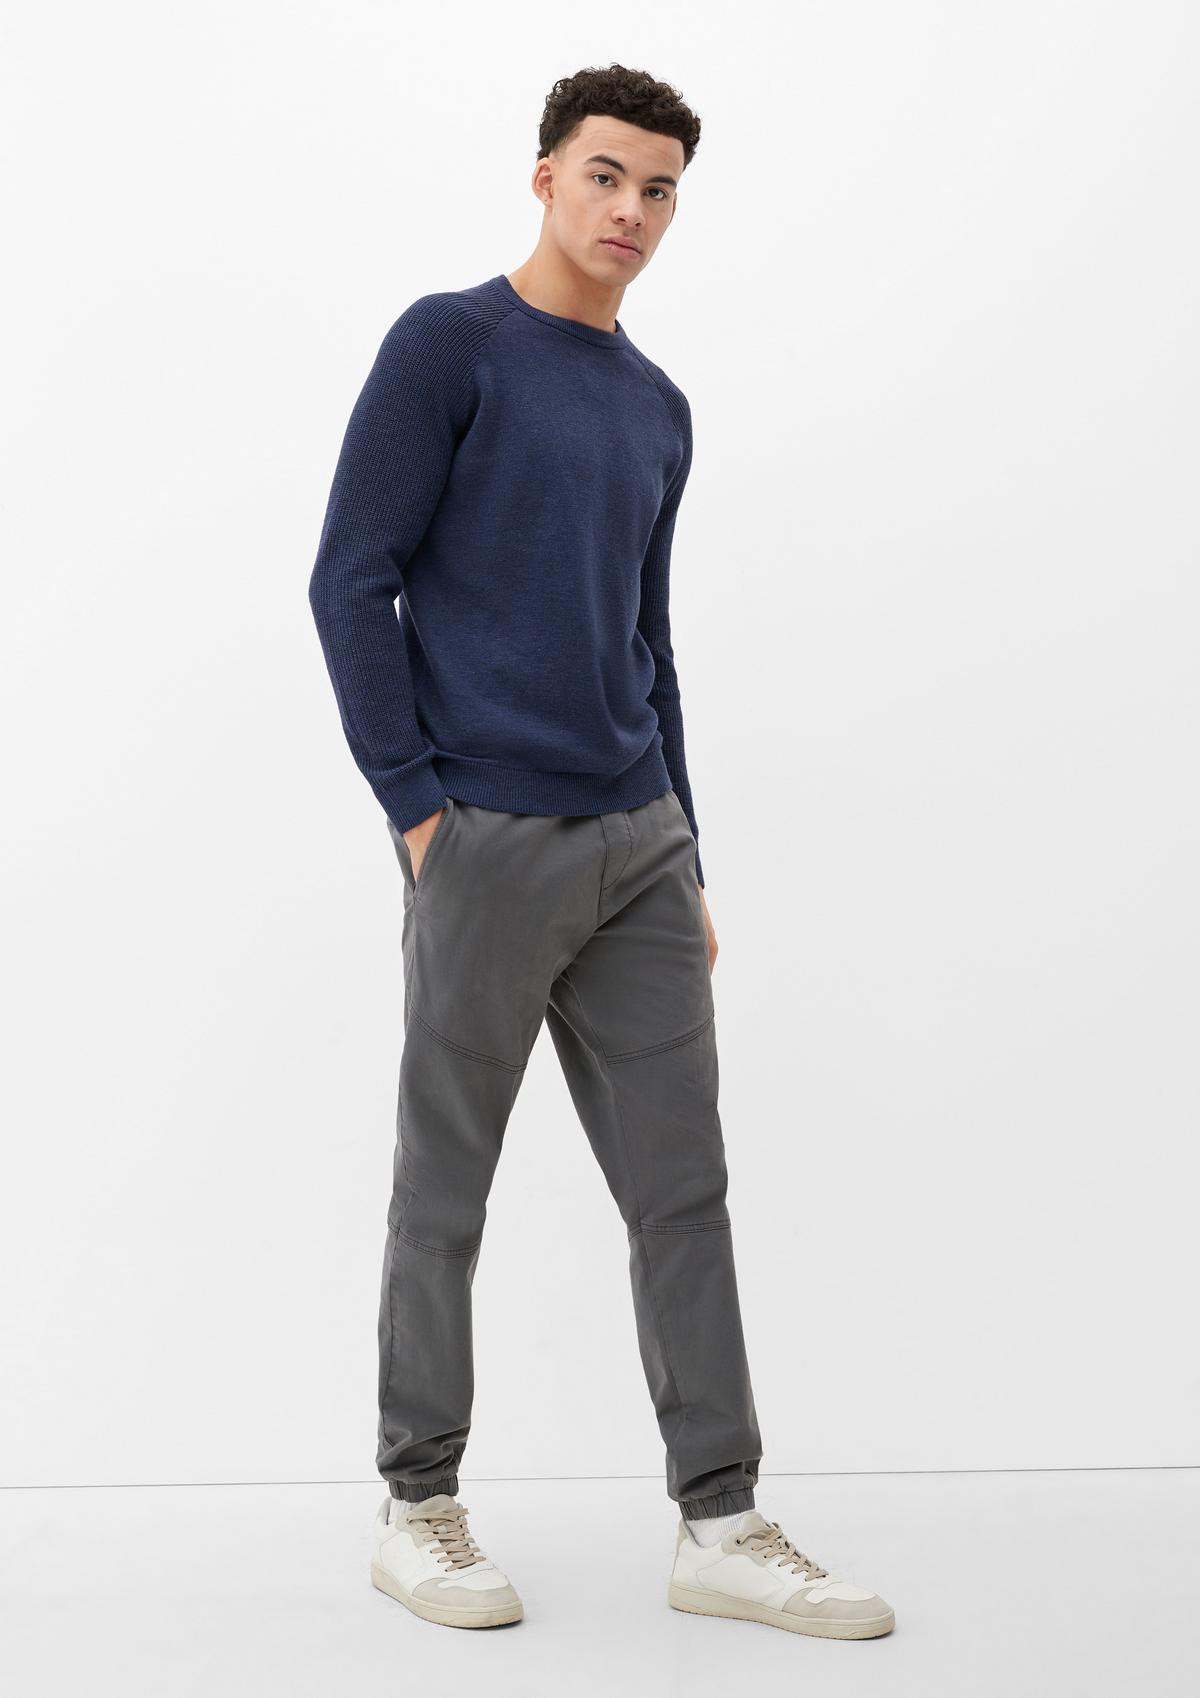 s.Oliver Textured knit jumper with raglan sleeves